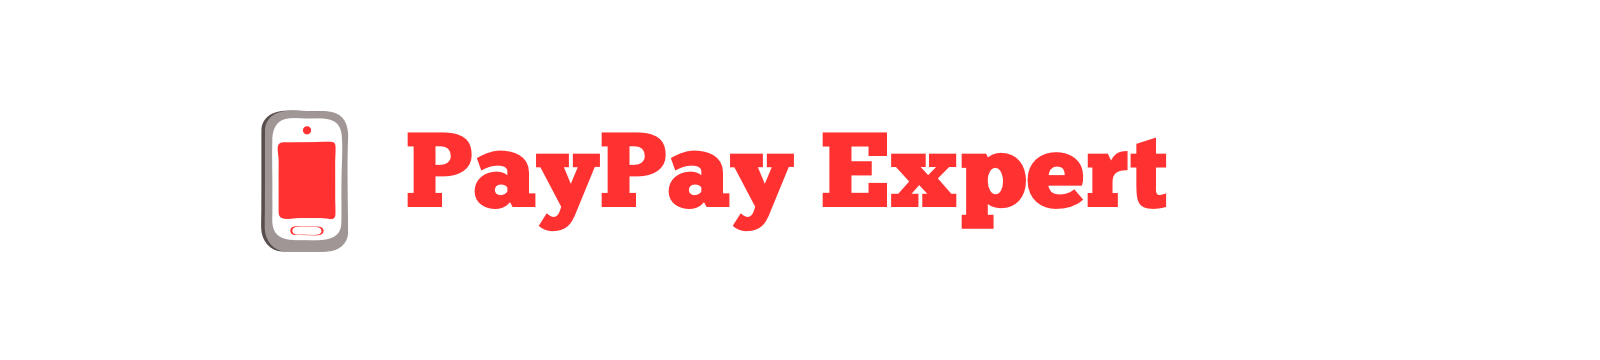 paypay-expert